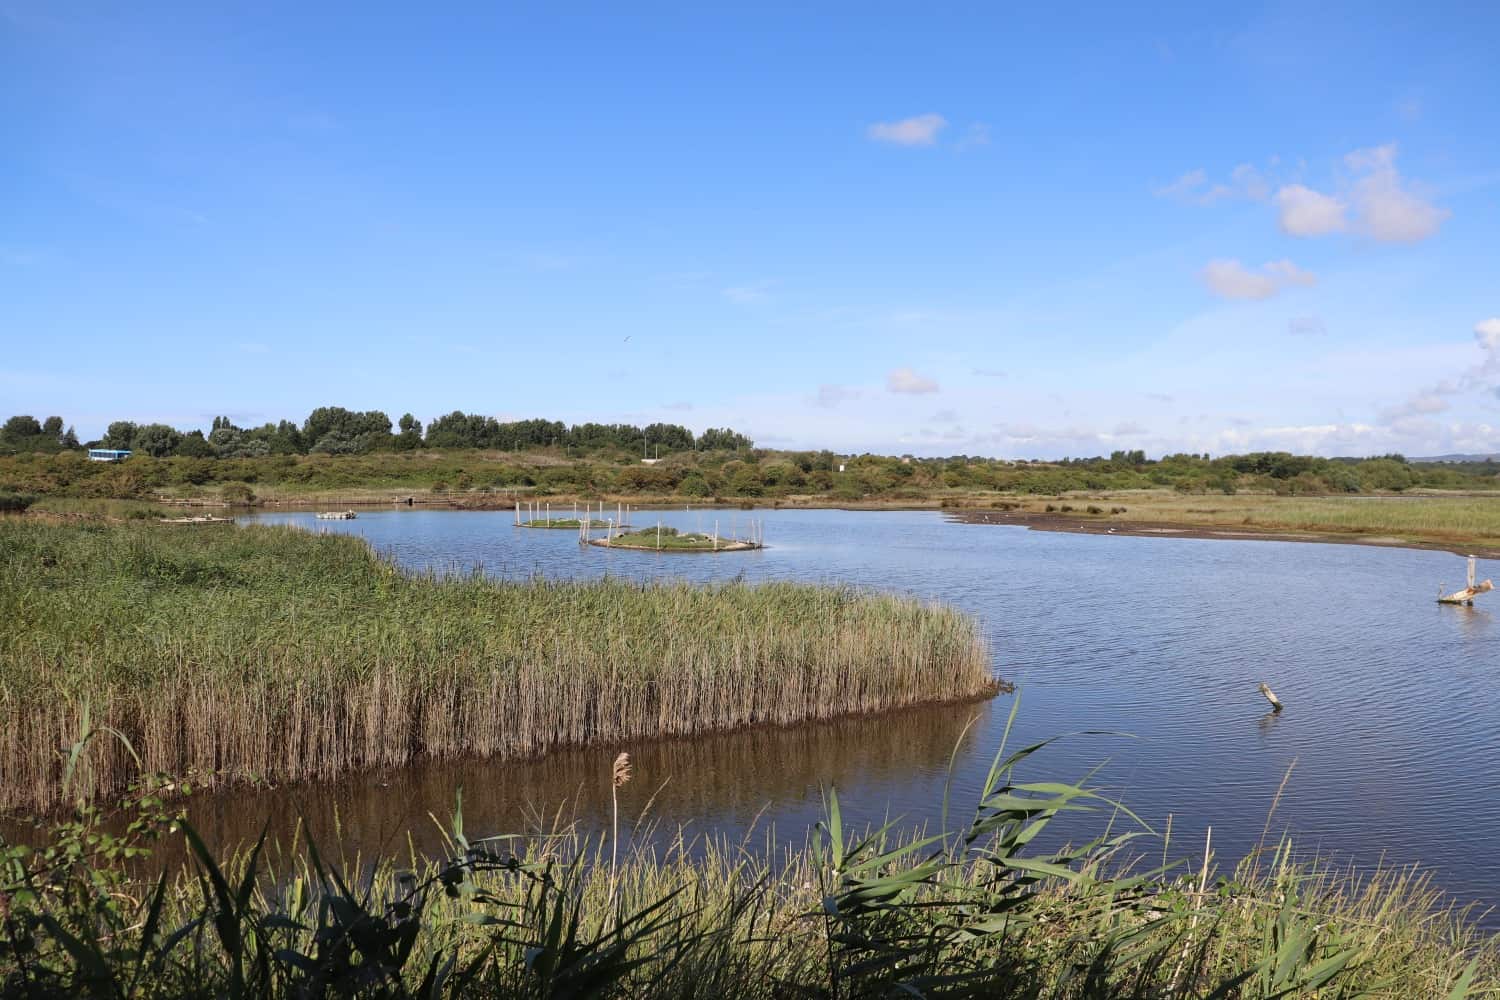 RSPB Lodmoor and Lodmoor Country Park